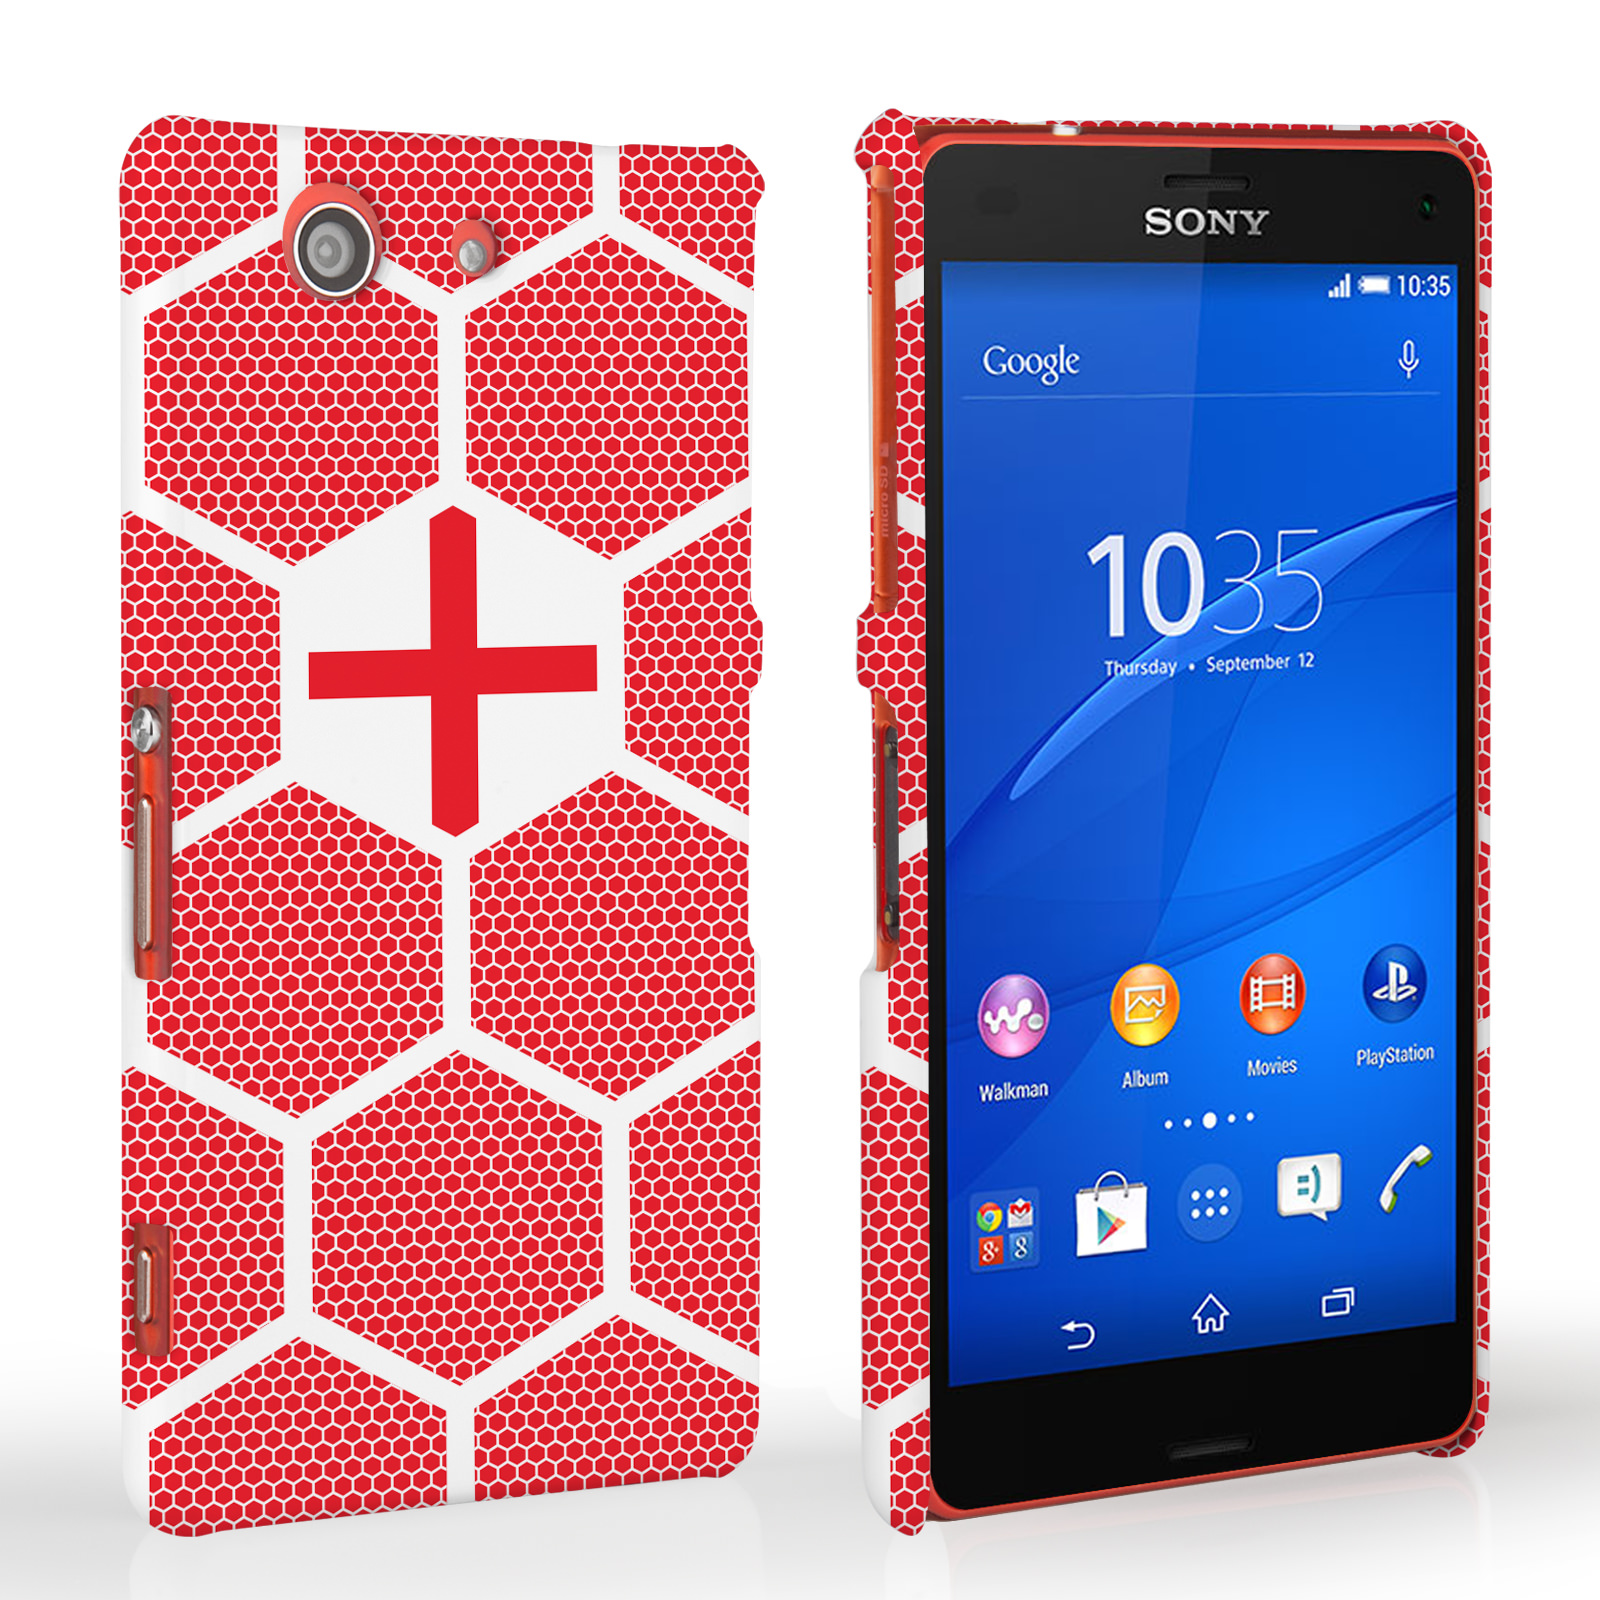 Caseflex Sony Xperia Z3 Compact England Football Pattern World Cup Case 